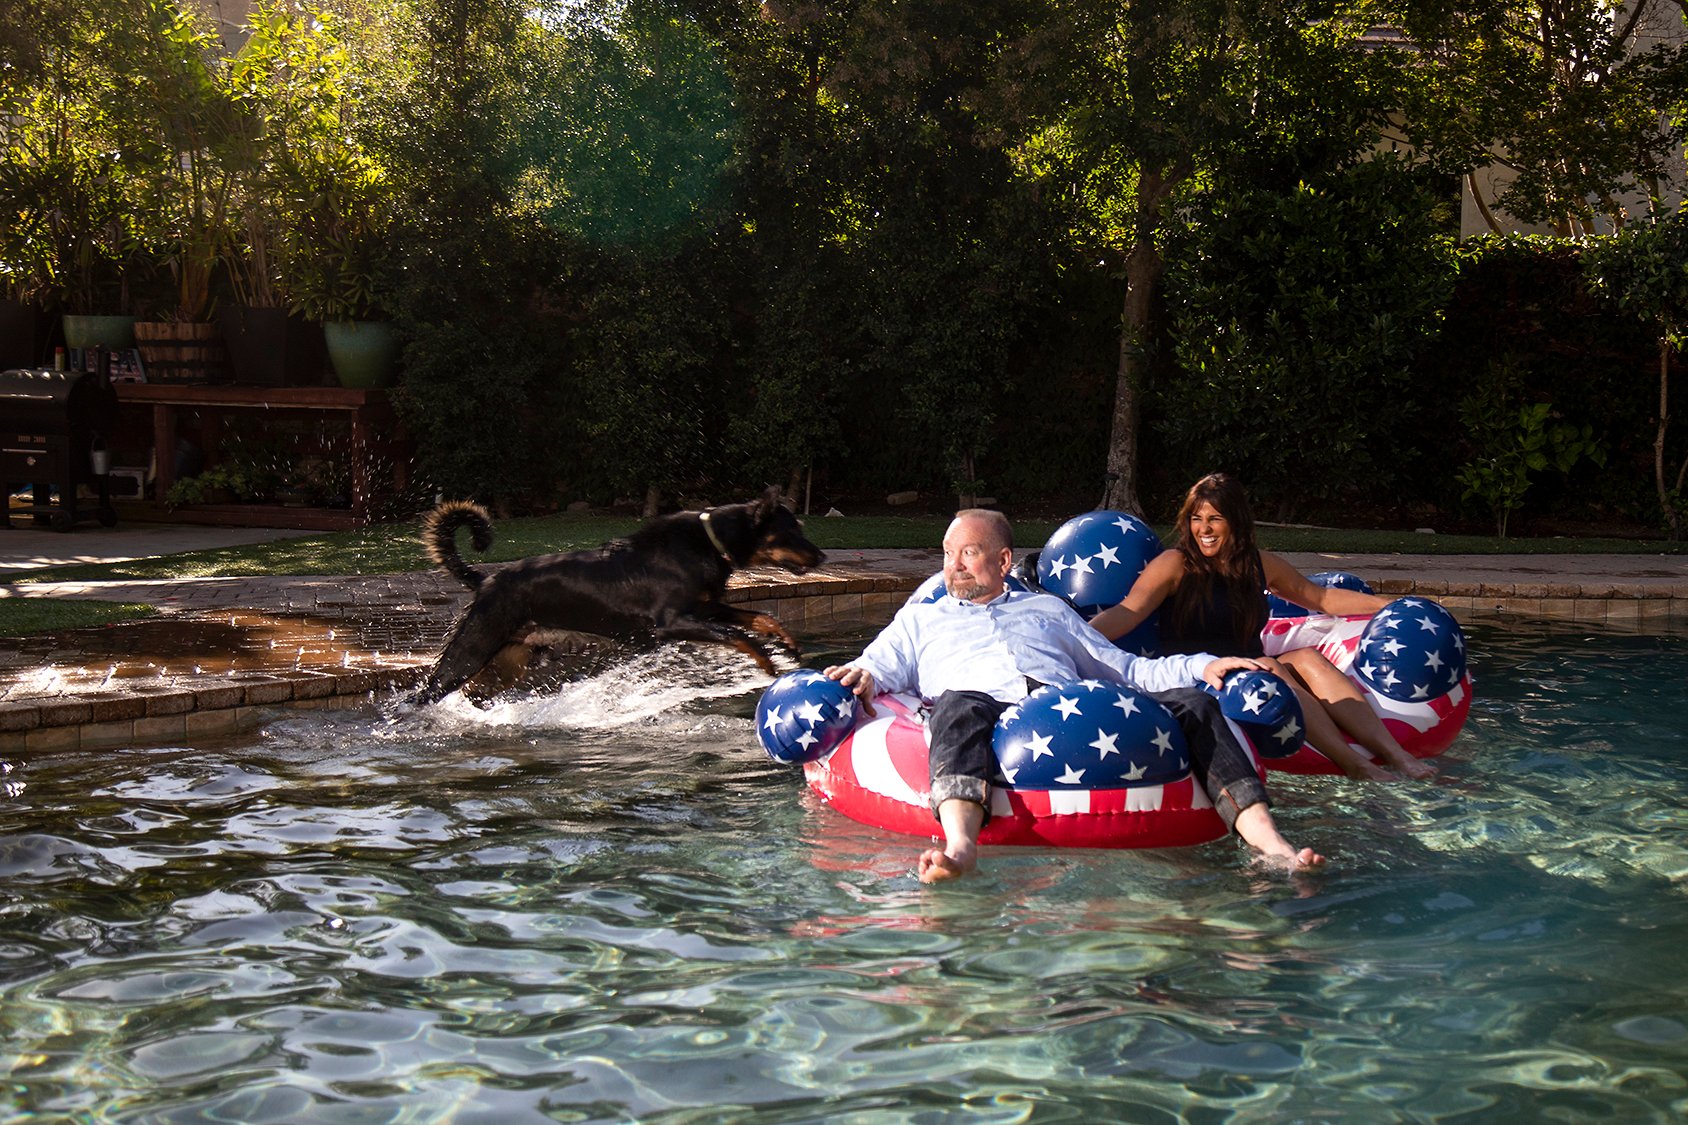 Michele Harrington With Her Husband And Dog In Their Backyard Pool, Playing